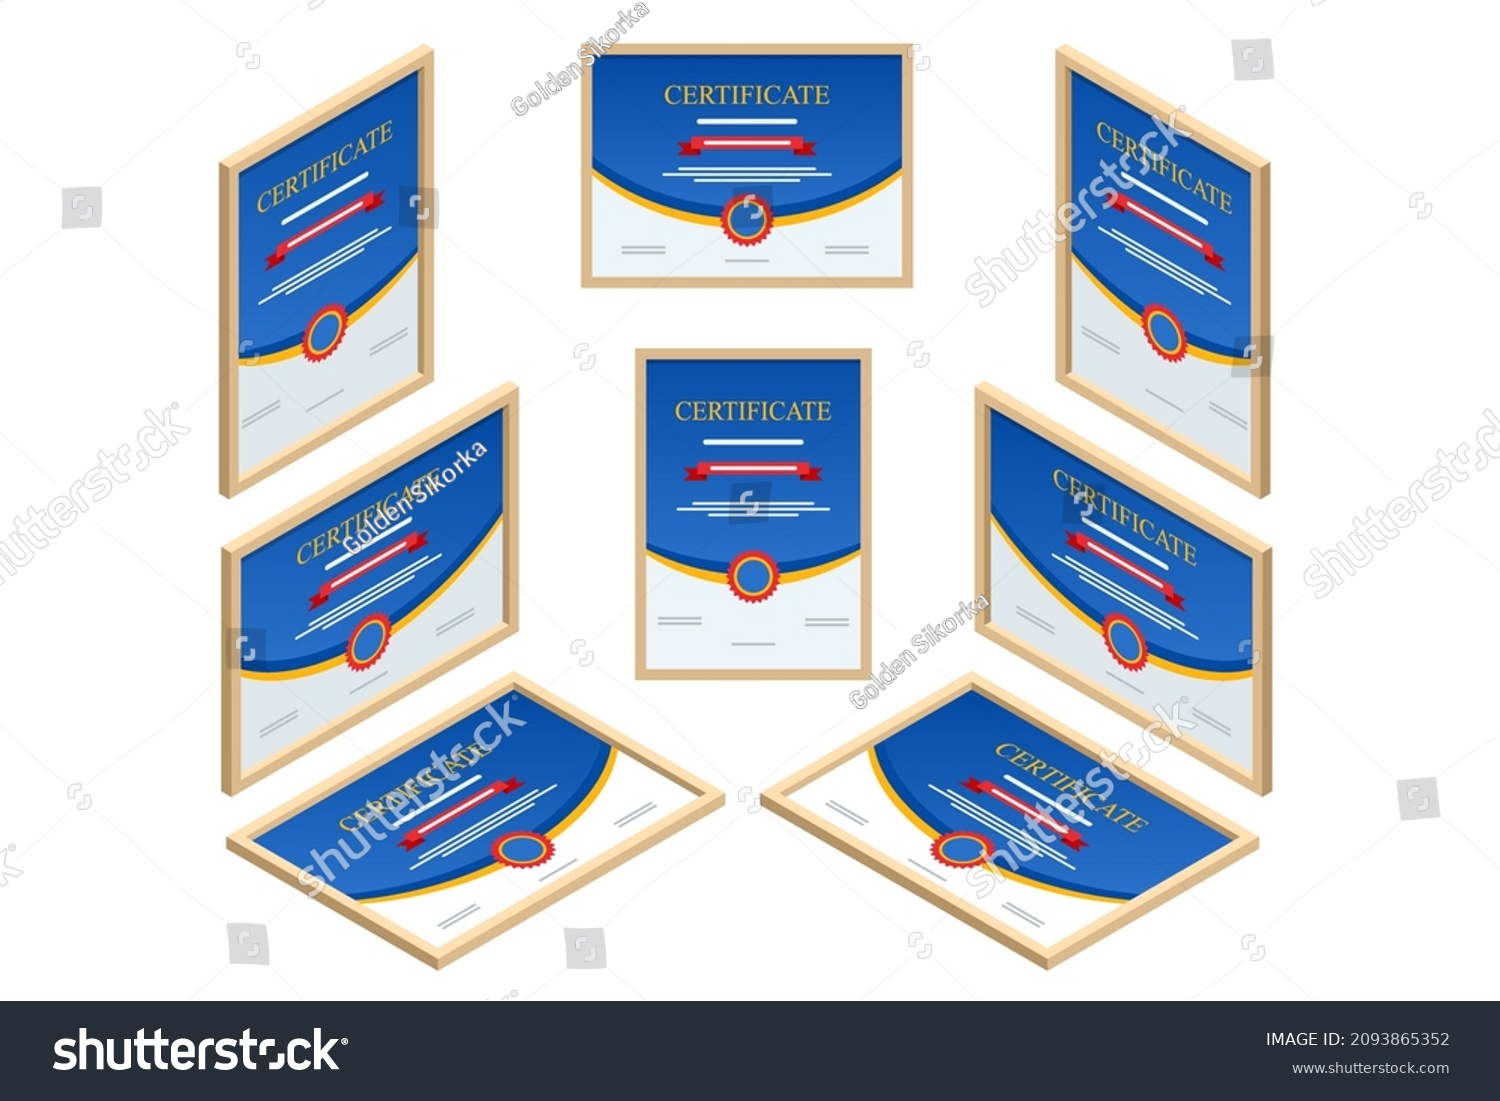 SVG of Certificate isometric view straight, left, right, top. Certificate template of achievement border template with badge for award, business, and education needs svg